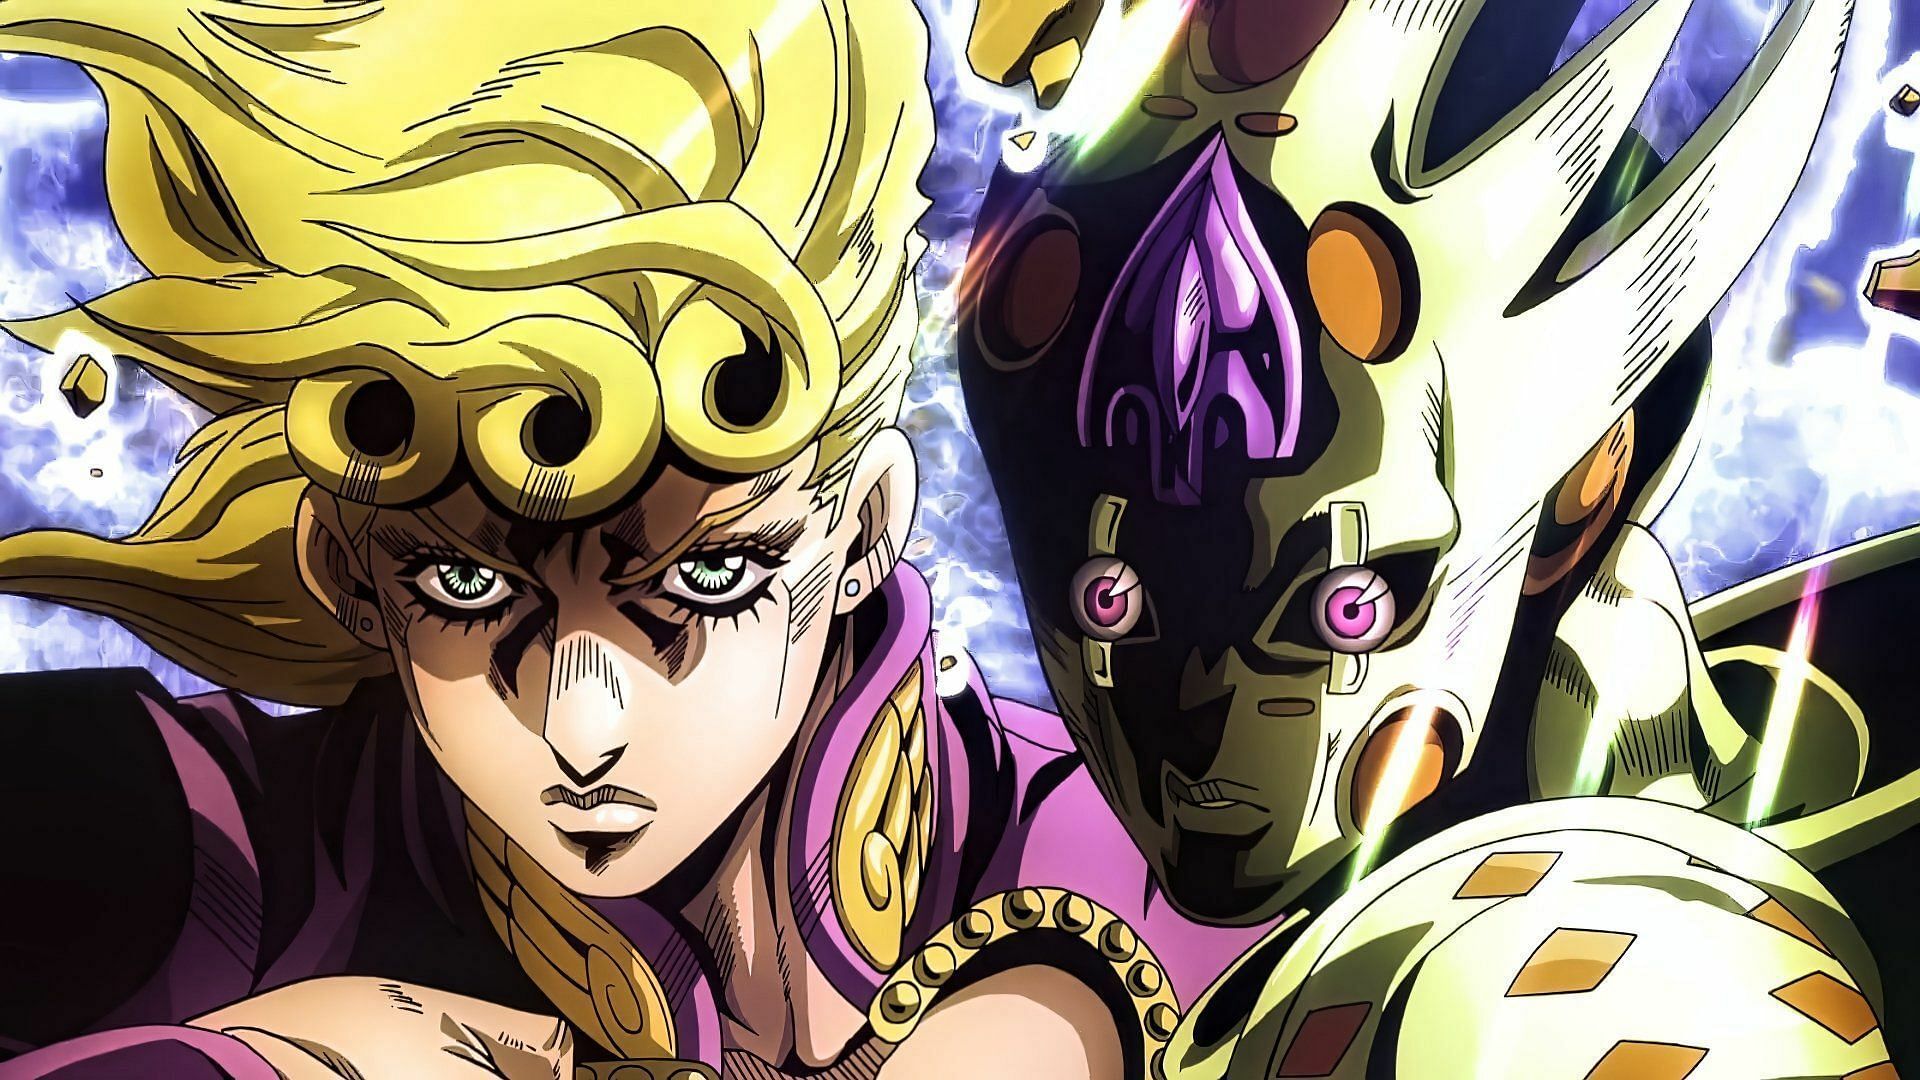 Giorno Giovanna (left) seen with Gold Experience Requiem (right) in the JoJo&#039;s Bizarre Adventure: Golden Wind anime series (Image via David Productions)